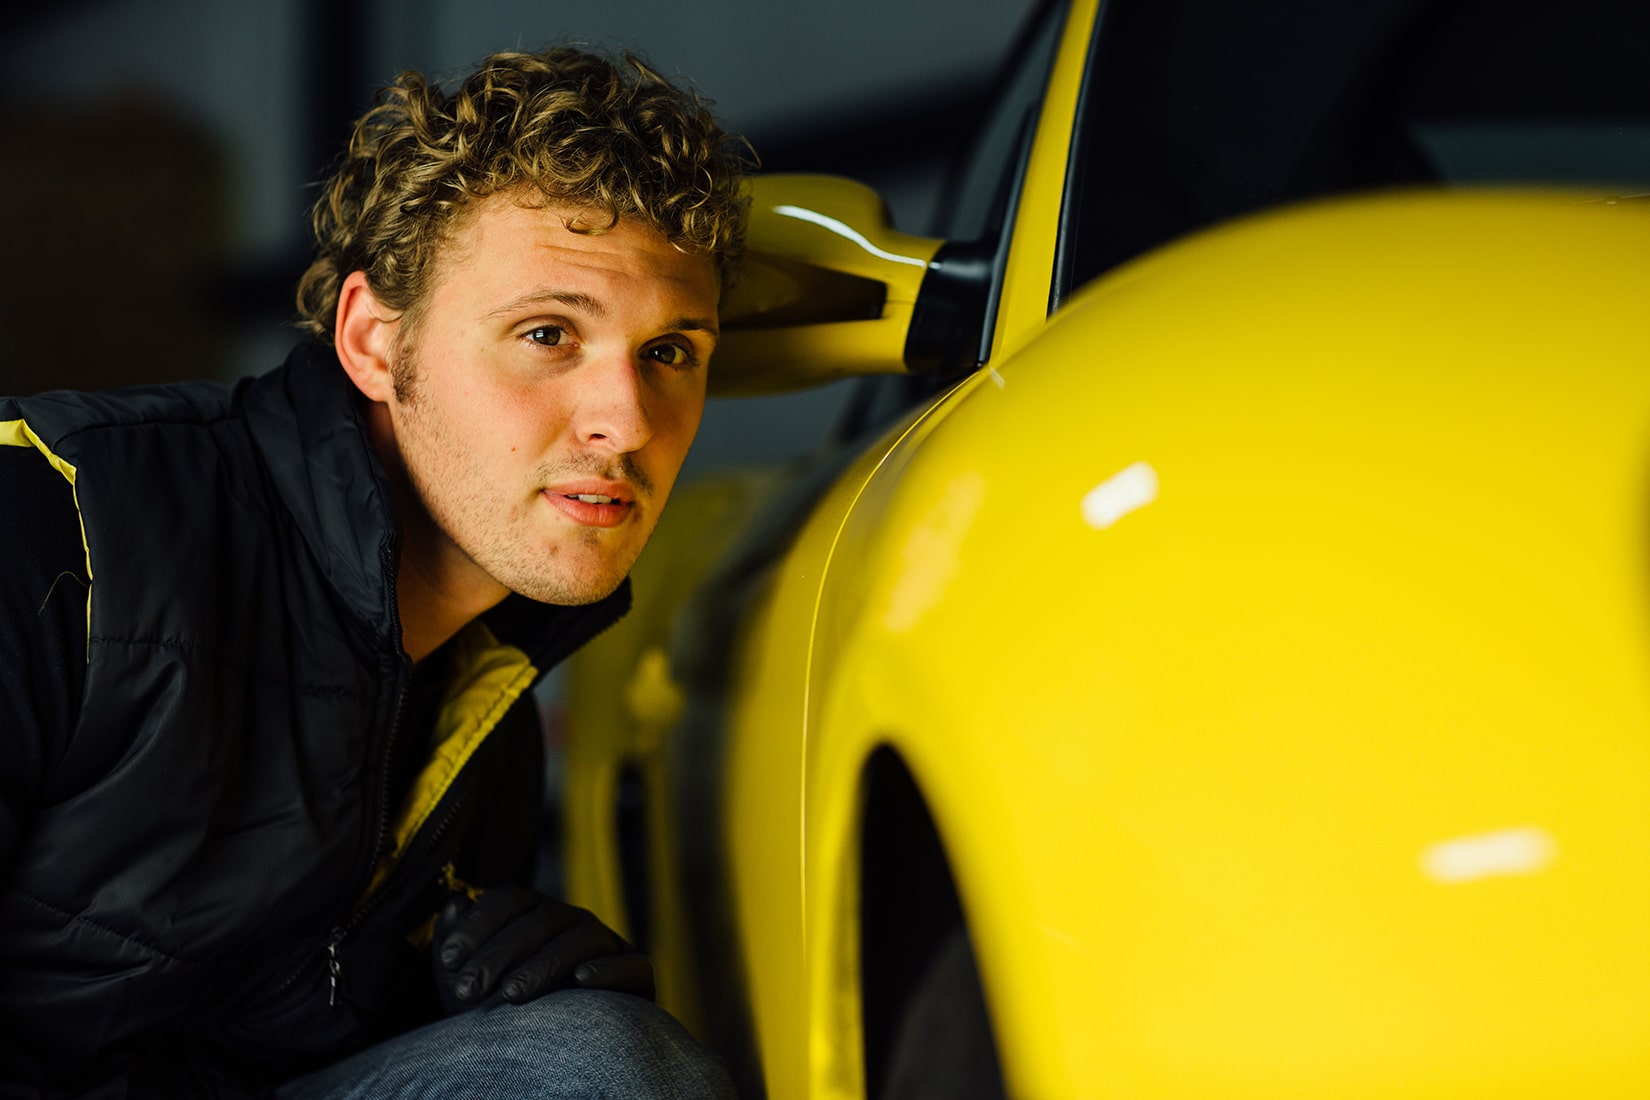 A RestorFX technician visually inspecting the restored surface of a yellow sports car and checking the quality up close